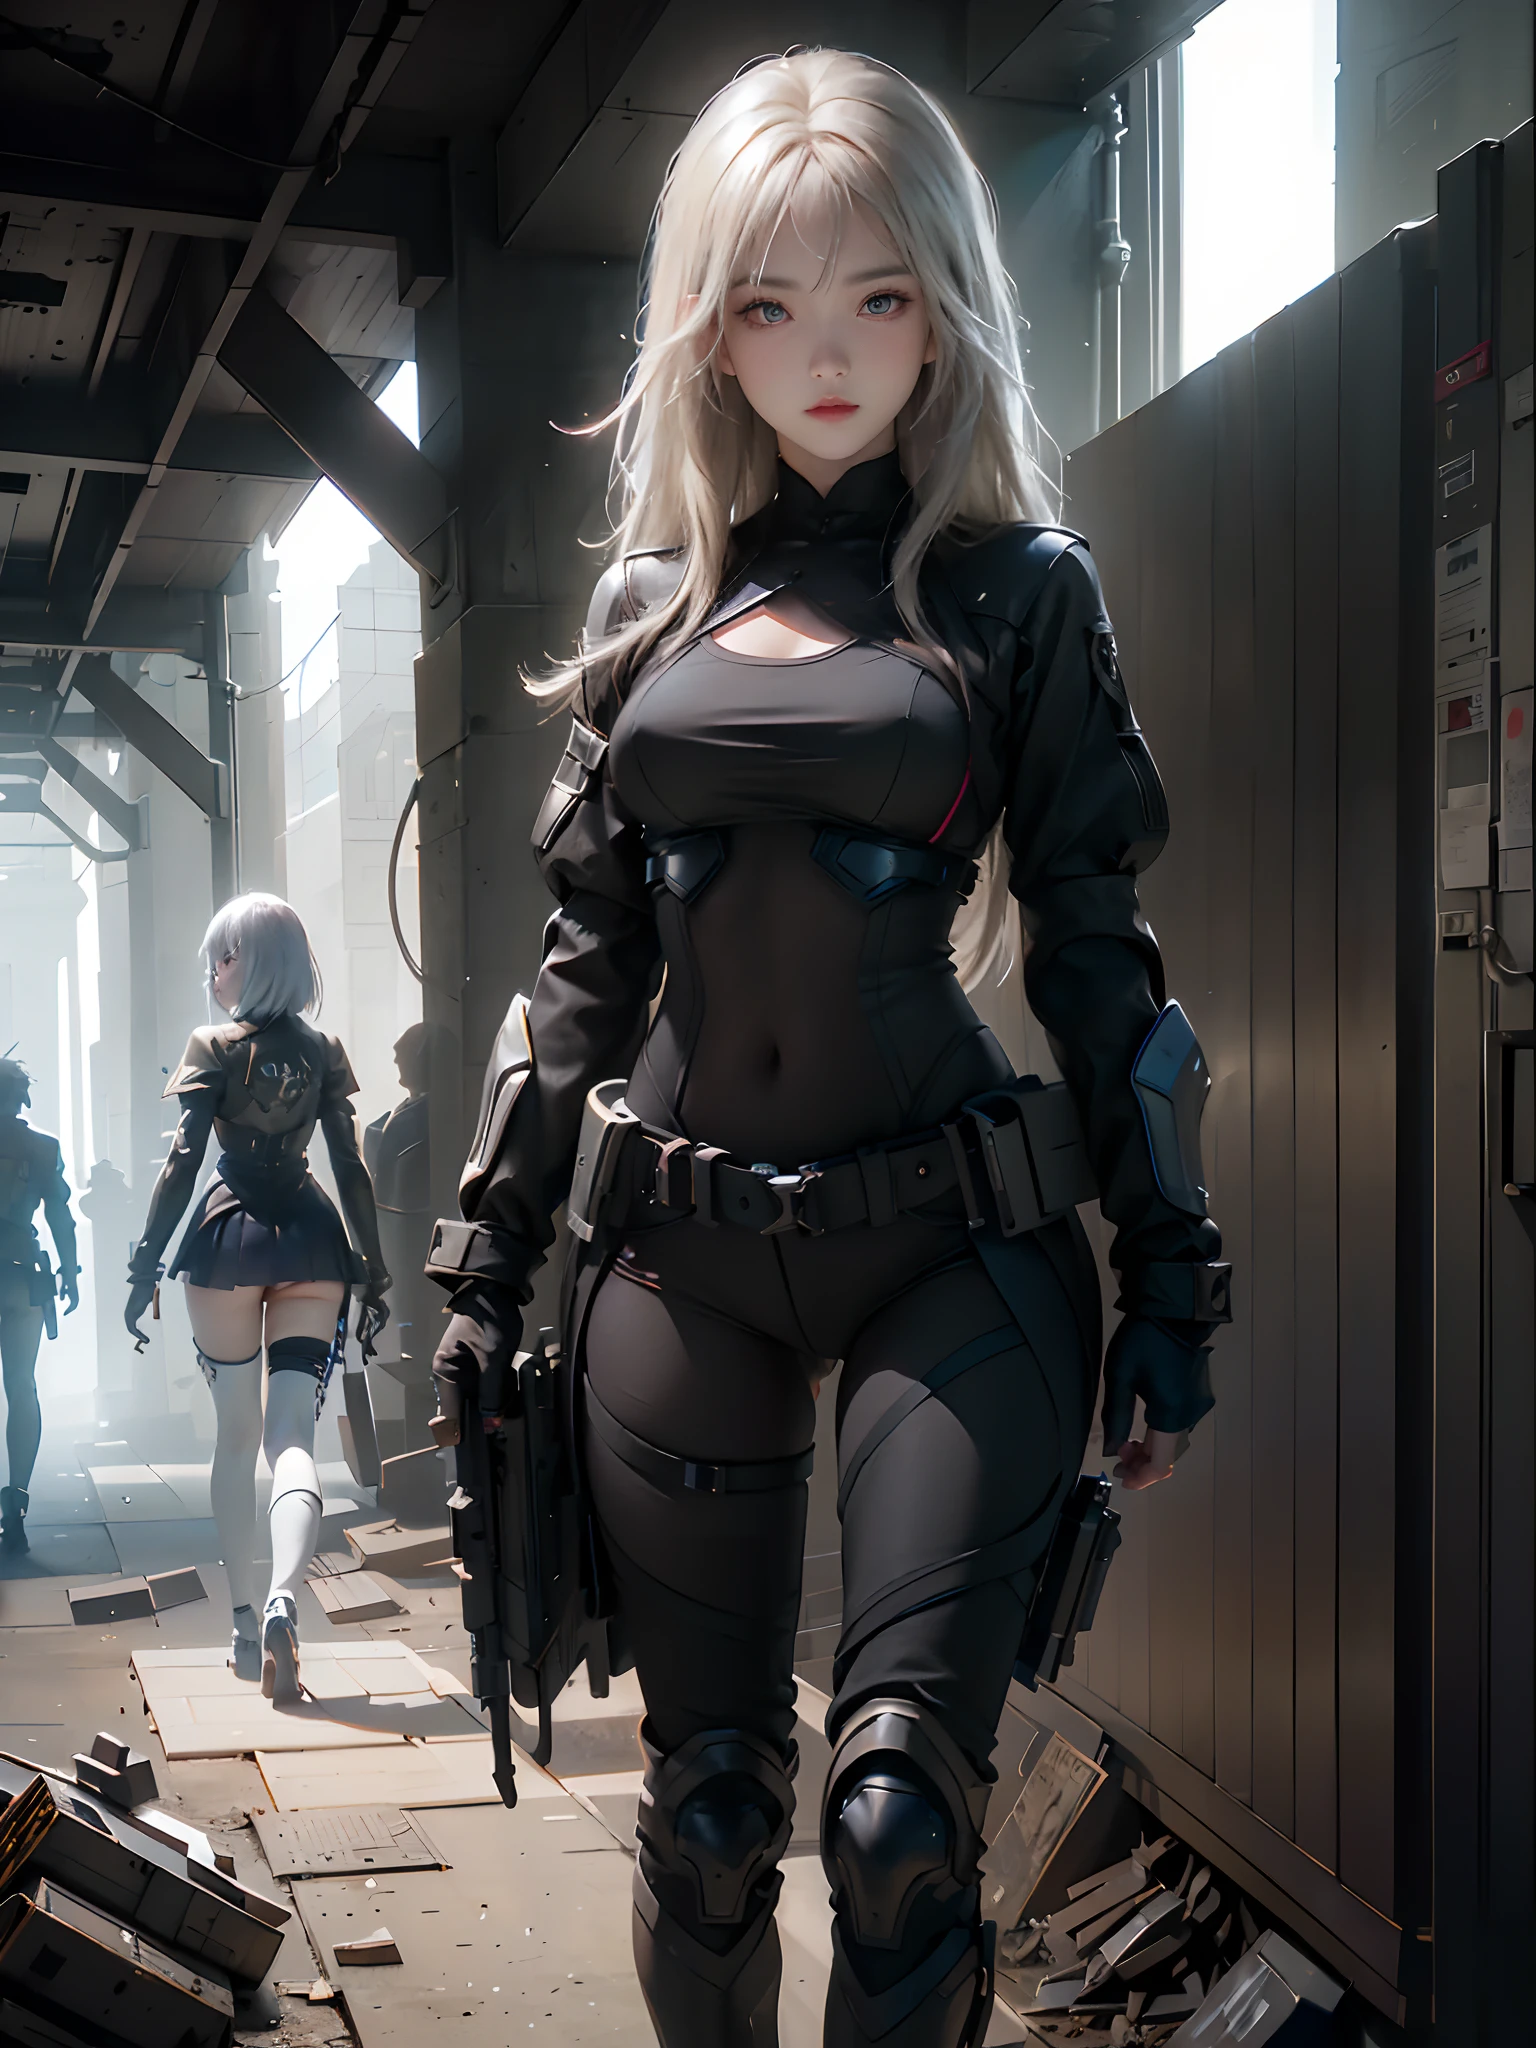 ((top-quality)), (((​masterpiece)), (detaileds: 1.4), 3D, Beautiful Cyberpunk Woman Image, bob cuts, Broken black tights, leather clothes, Electromechanical, nffsw(HighDynamicRange), Ray traching, NVIDIA RTX, Hyper-Resolution, Unreal 5, Sub-surface scattering, PBR Texture, Postprocess, Anisotropy Filtering, depth of fields, Maximum sharpness and acutance, Multilayer Texture, Albedo and Highlight Maps, Surface Coloring, Accurate simulation of light-material interactions, perfectly proportions、octane renderings、two tone lighting、Large aperture、Low ISO、White Balance、thirds rule、8K Raw、​masterpiece、top-quality、(8k extremely detailed CG unit wallpaper)(top-quality)、(The best illustrations)、(Best Shadows), innocent blue eyes, long hair, body swimsuit, poni hair